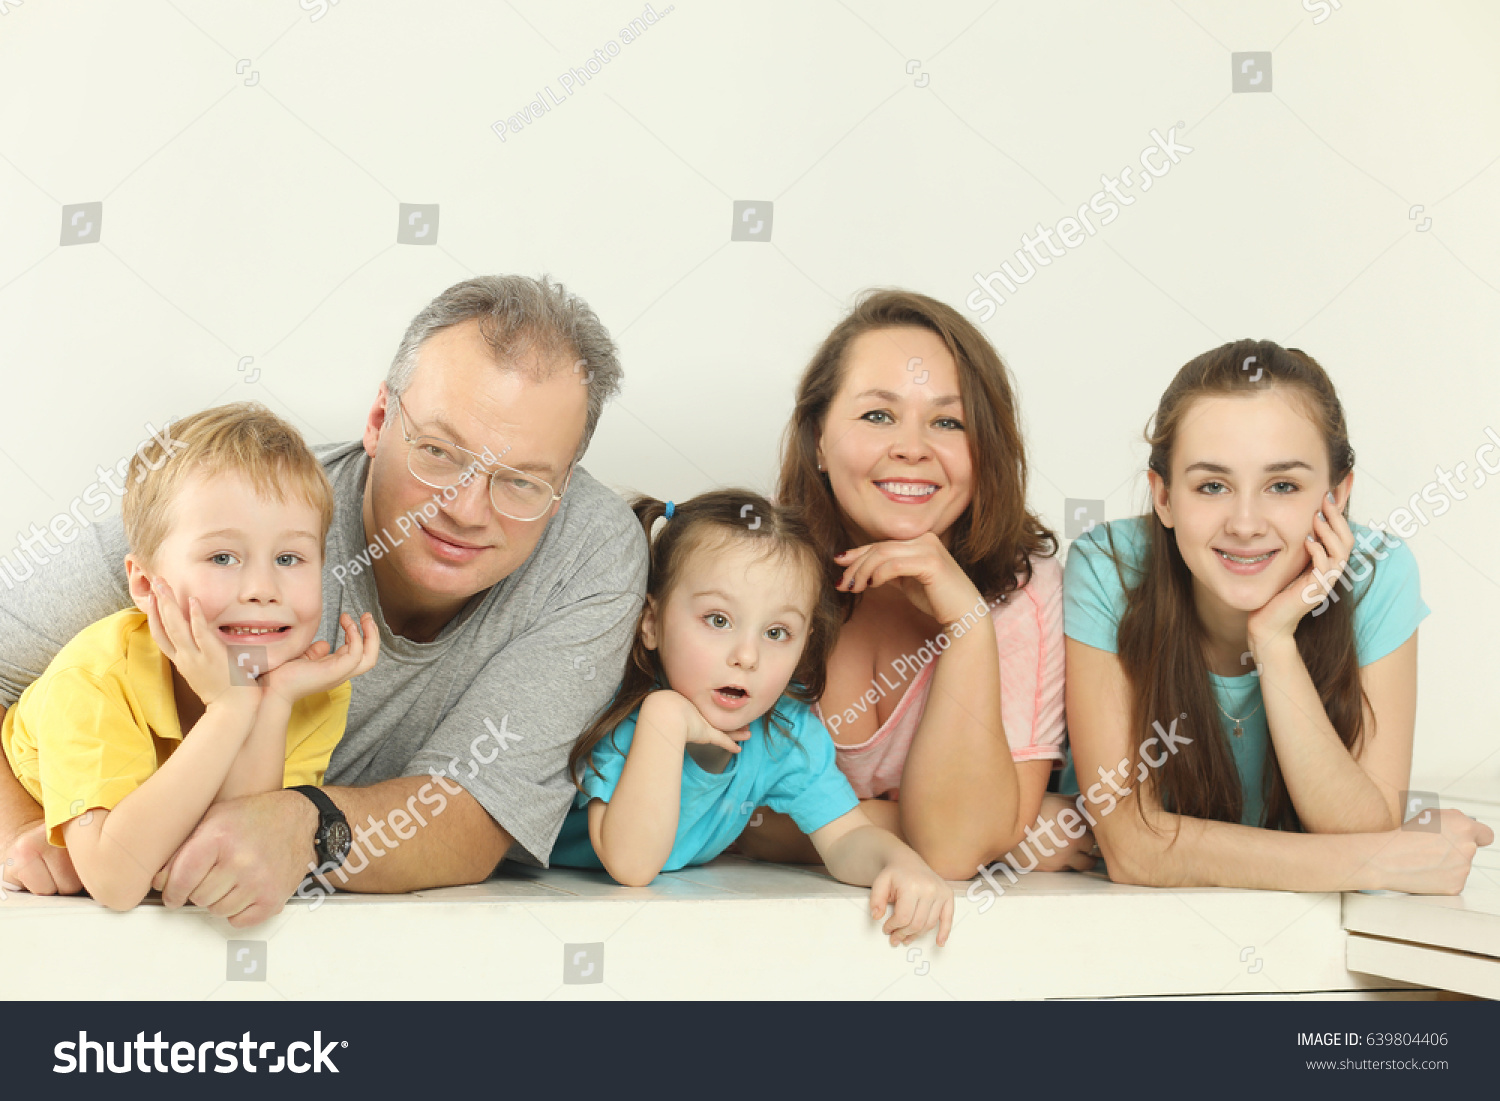 Happy Family Father Mother Two Girls Stock Photo Edit Now 639804406